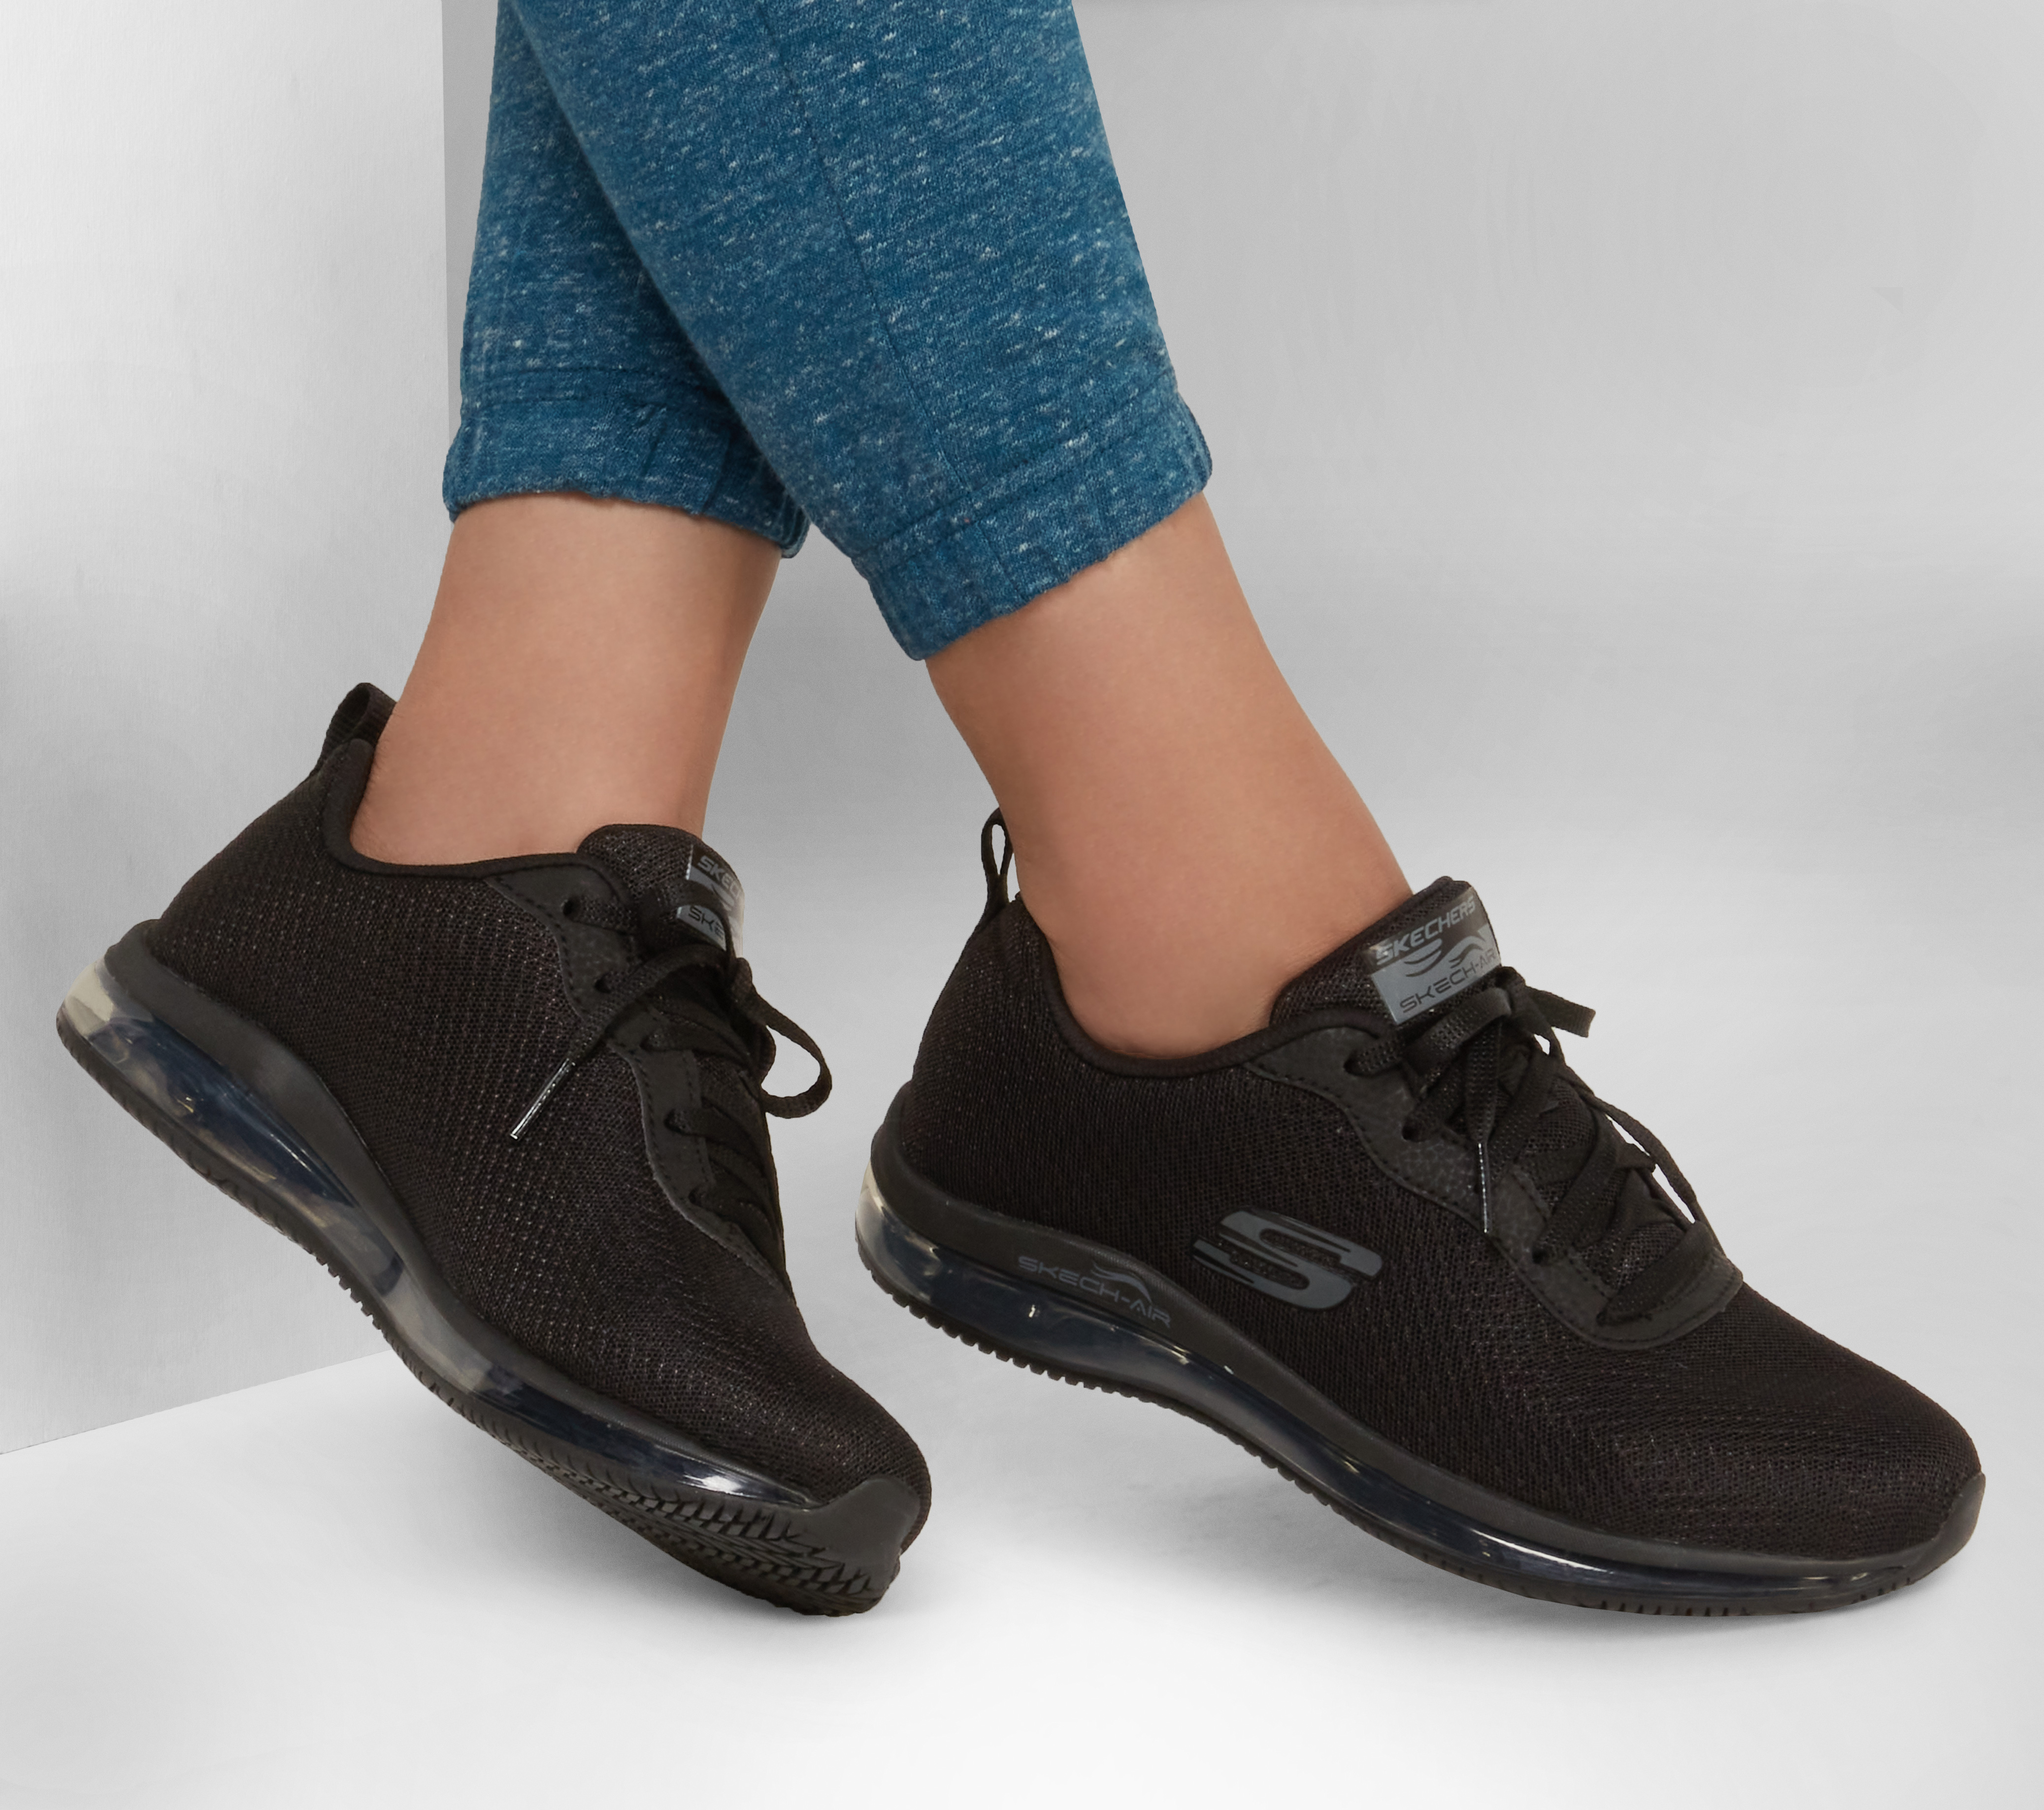 SKECHERS SR | Skech-Air Relaxed Work Fit: